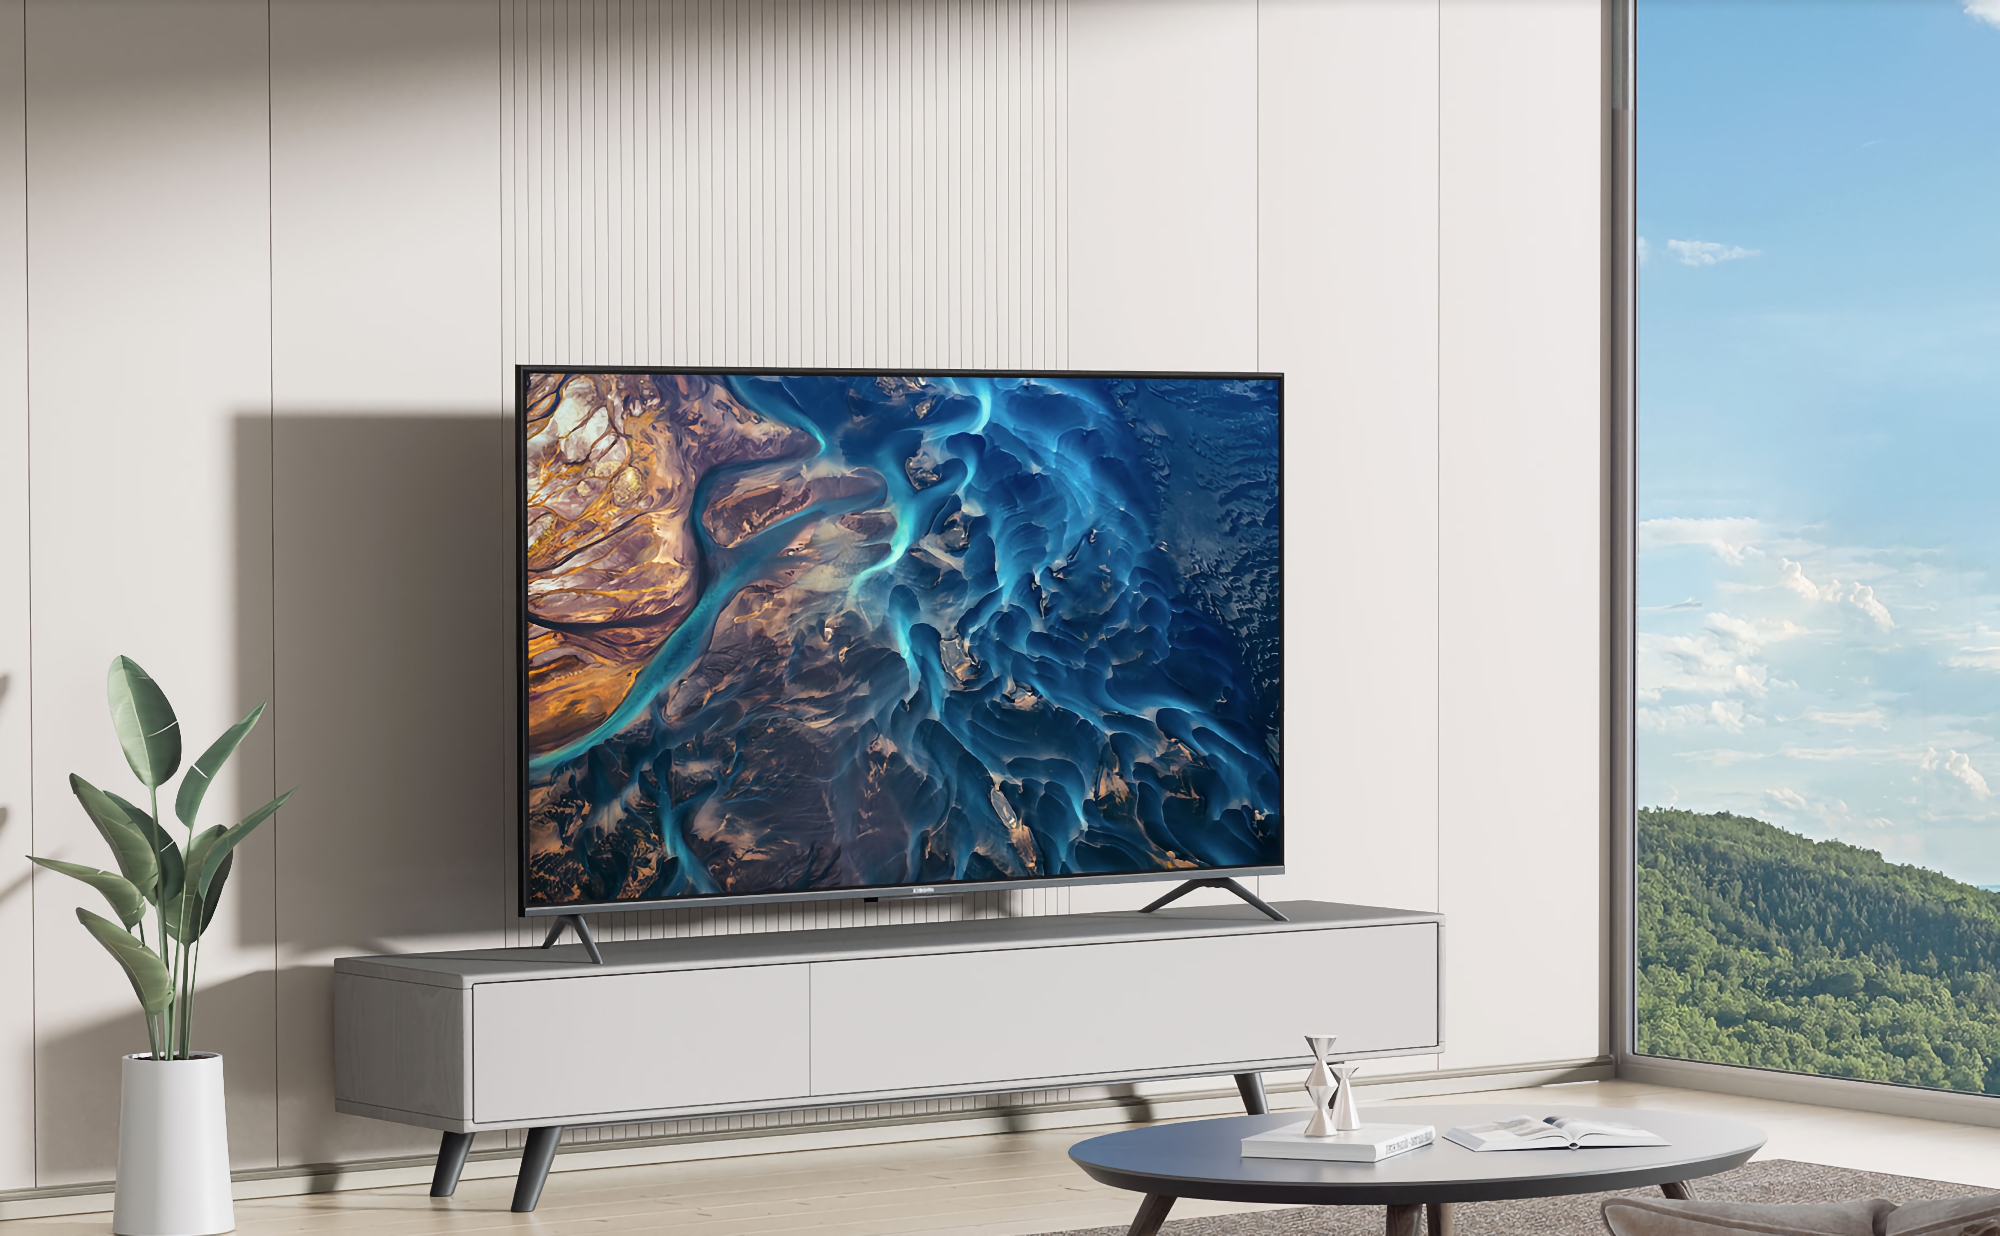 Xiaomi TV ES50 2022: 50-inch 4K TV with MediaTek chip and Dolby Vision support